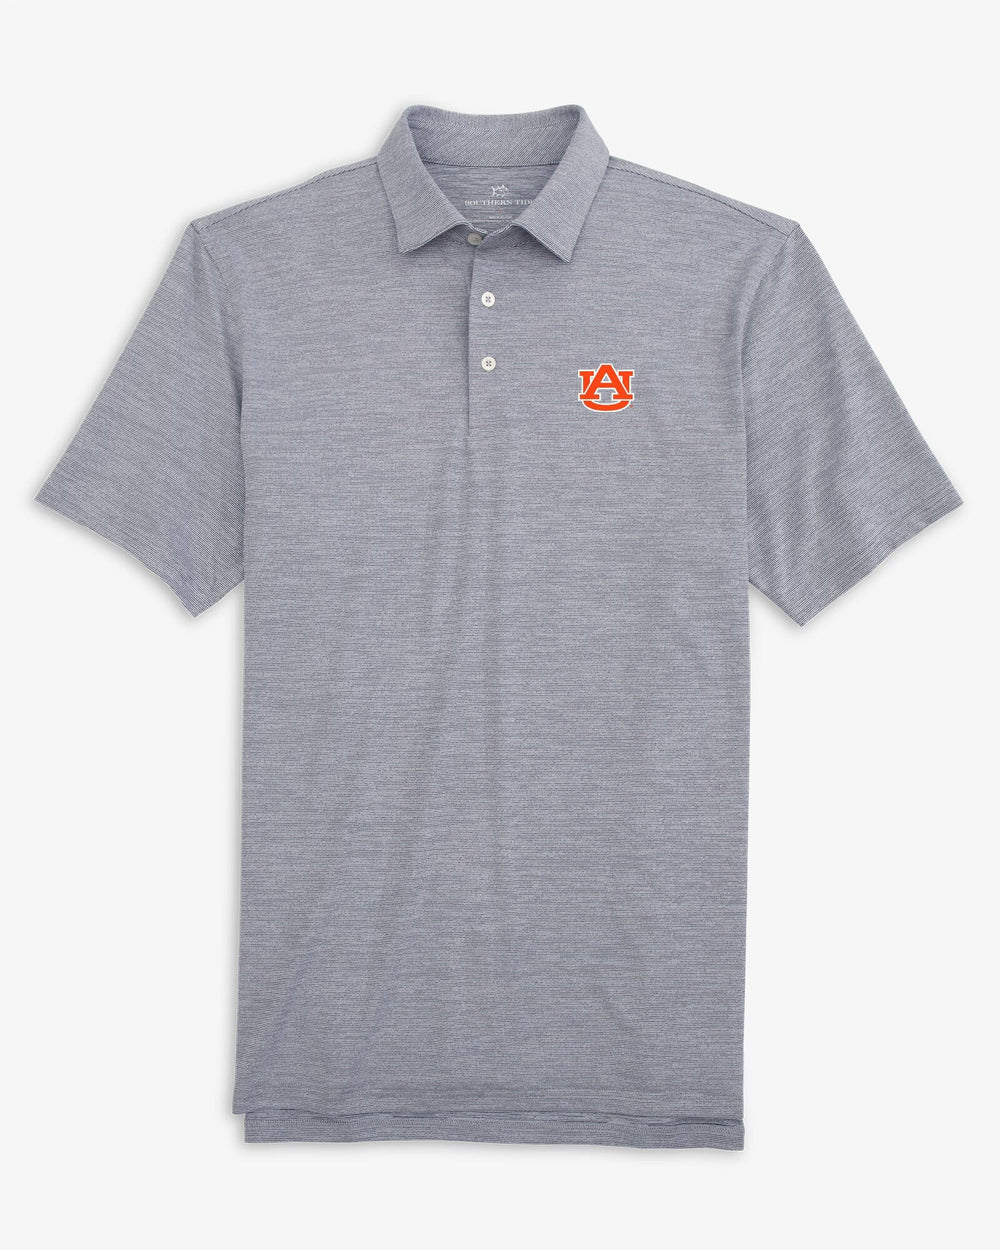 The front view of the Auburn Tigers Driver Spacedye Polo Shirt by Southern Tide - Navy